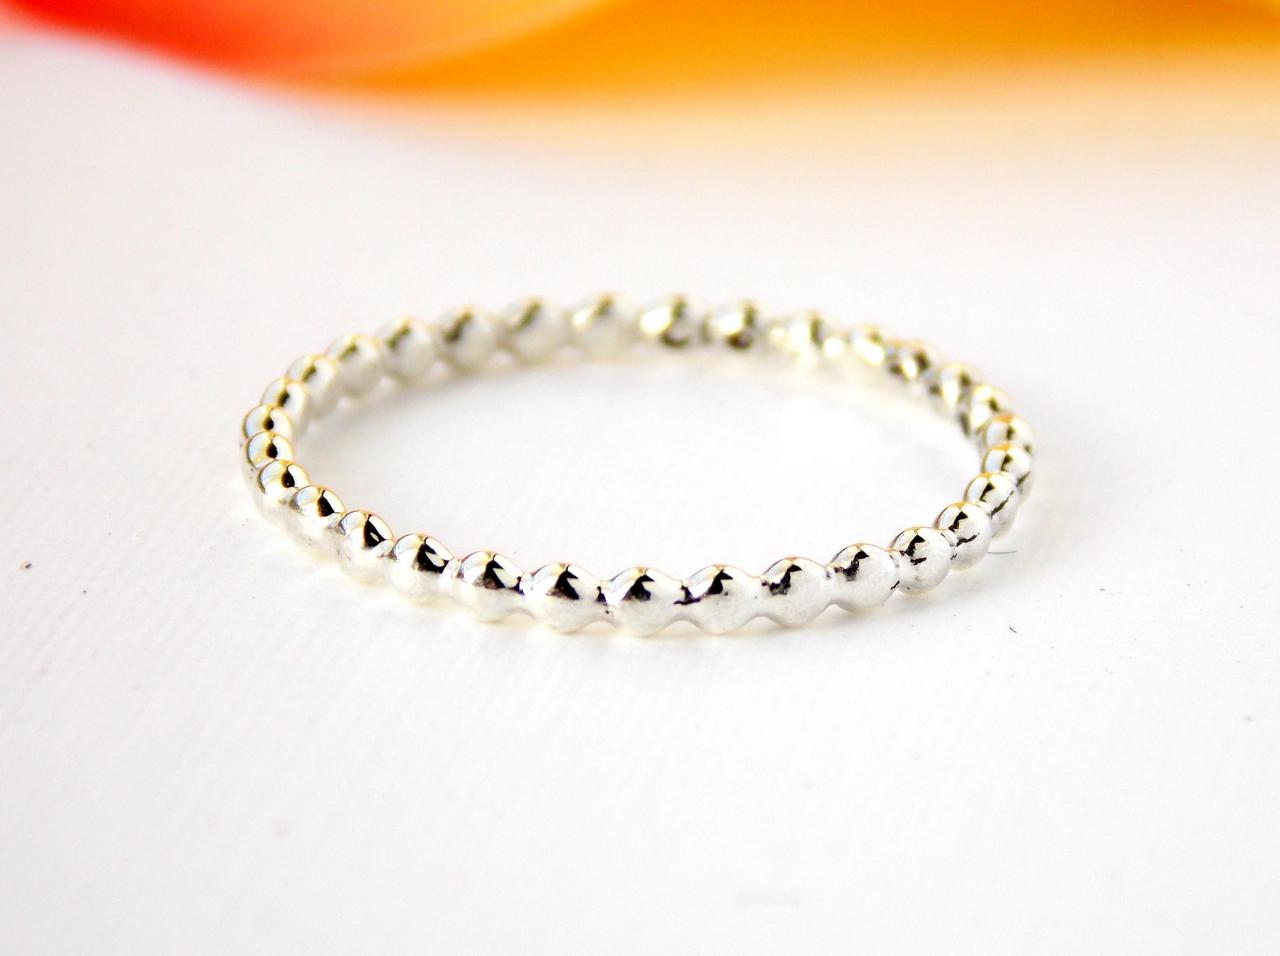 Beaded Stacking Ring - Sterling Silver Ring, Dainty Ring, Simple Ring, Petite Ring, Small Ring, Stacking Ring, Stackable Ring, Beaded Ring